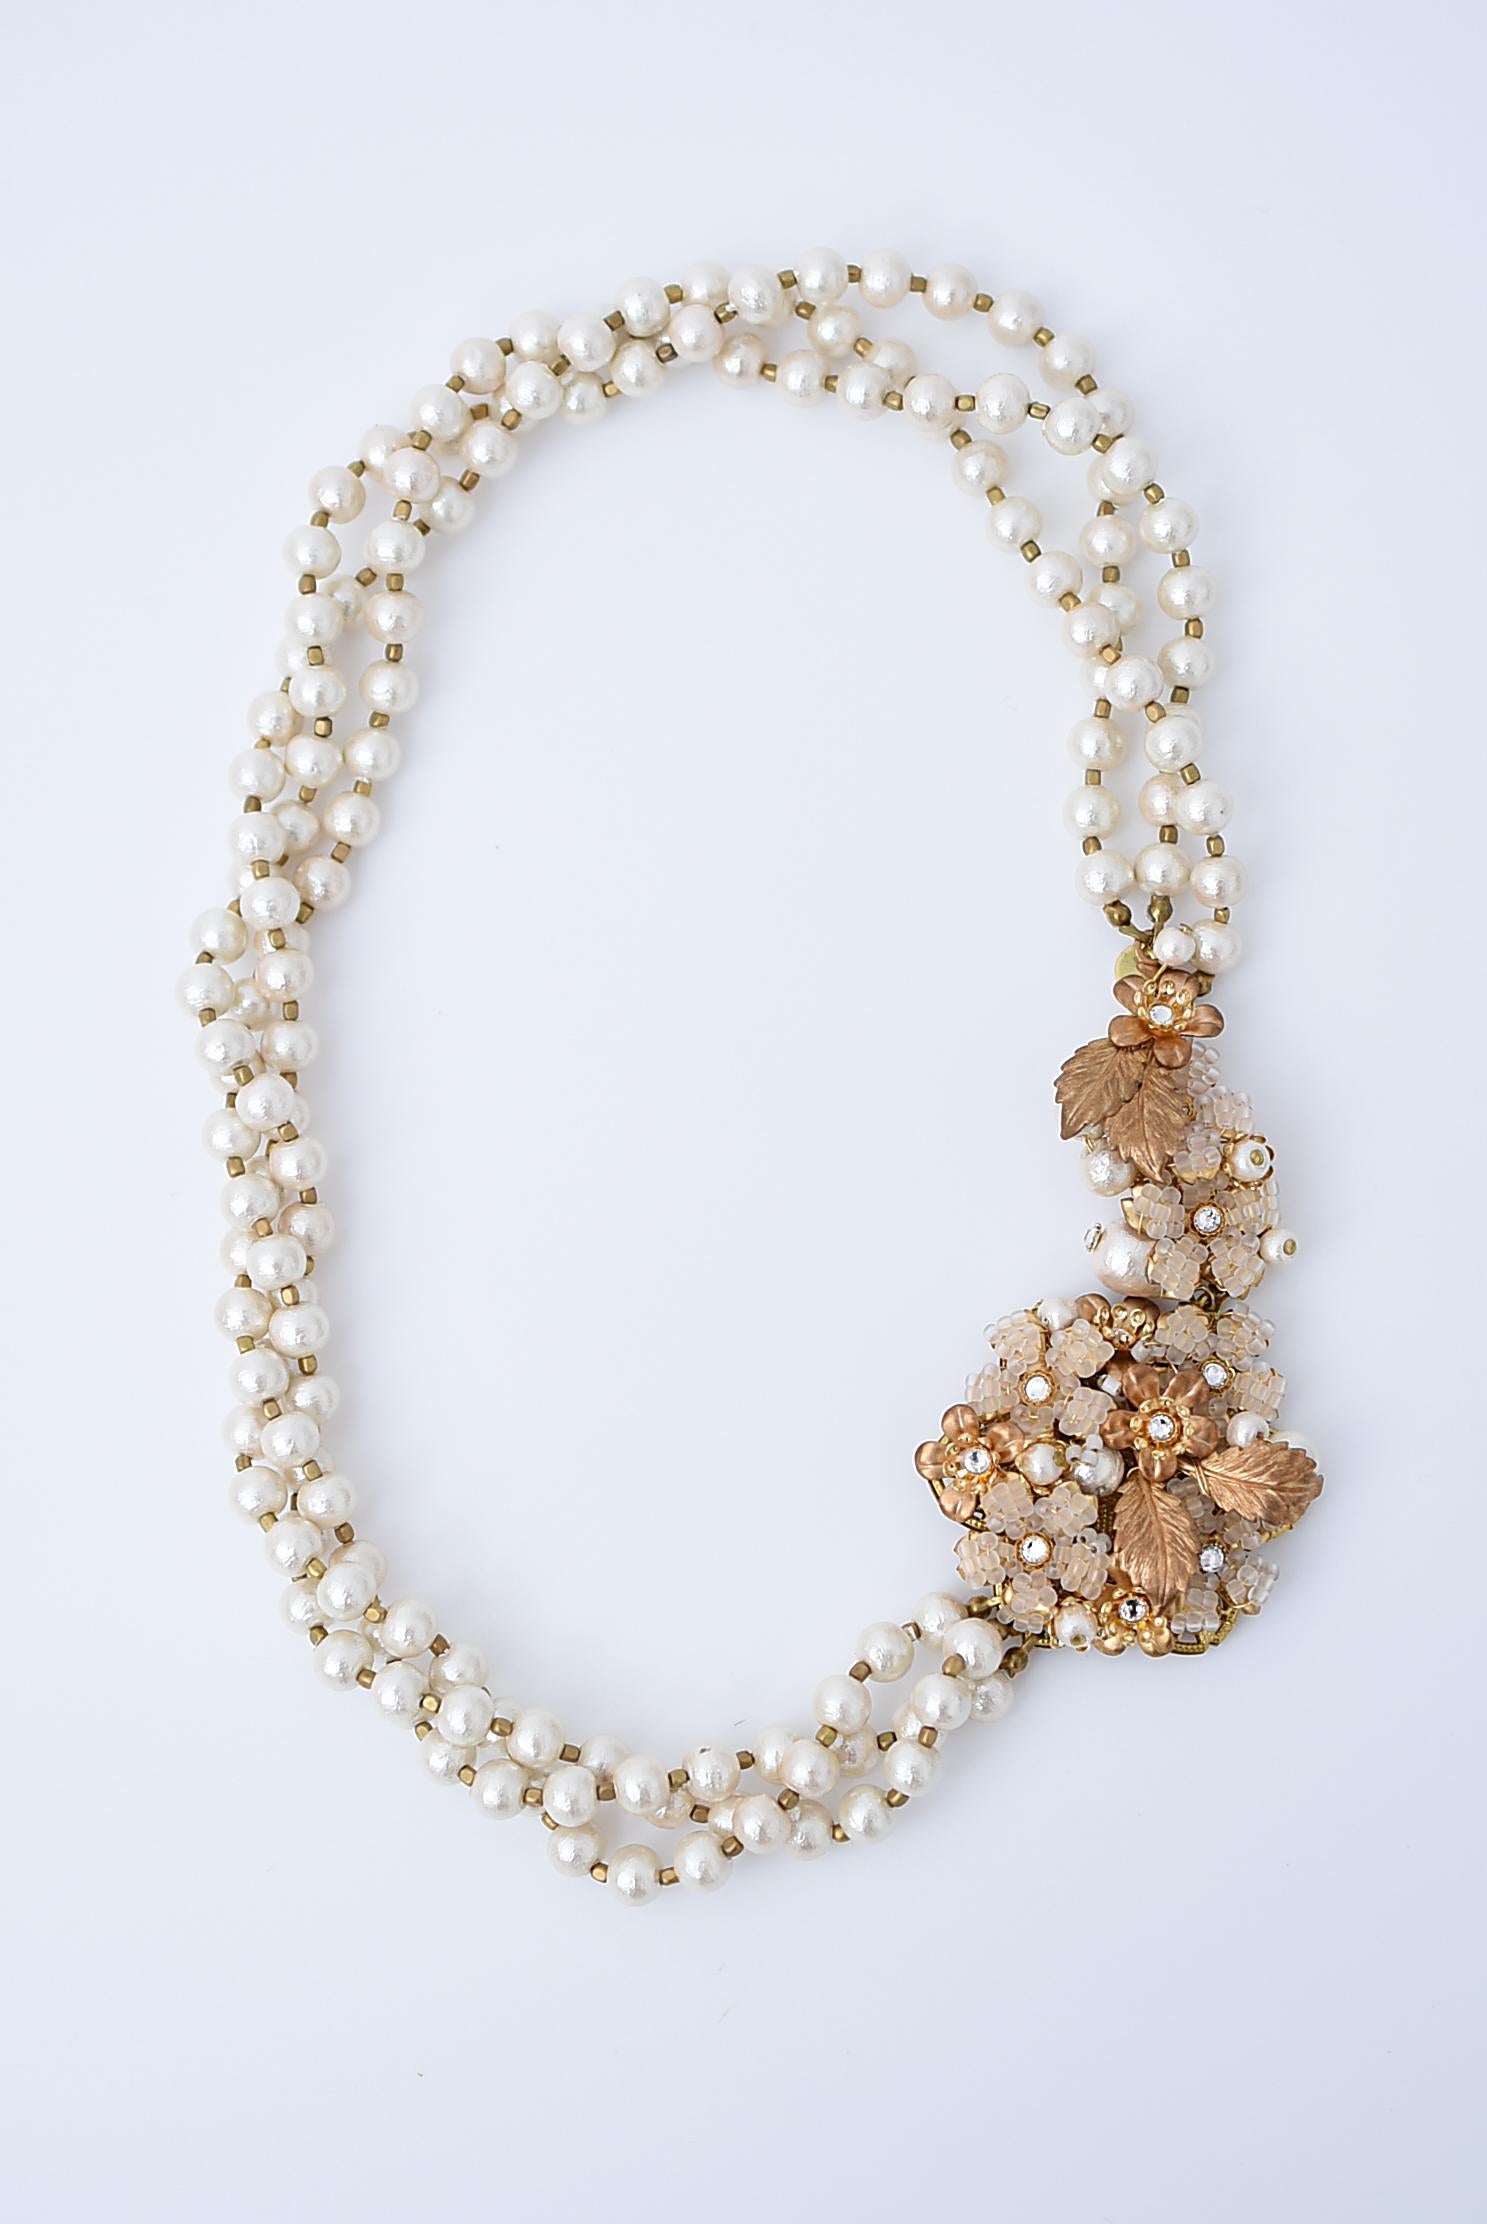 material:1970’s American vintage parts,glass beads,brass,cotton pearl,wood pearl,magnet,swarovski
size:around 49cm

The yamasakura motif is so gorgeous!
You can use 2way (short necklace and long necklace).
The magnet type makes it easy and clean to